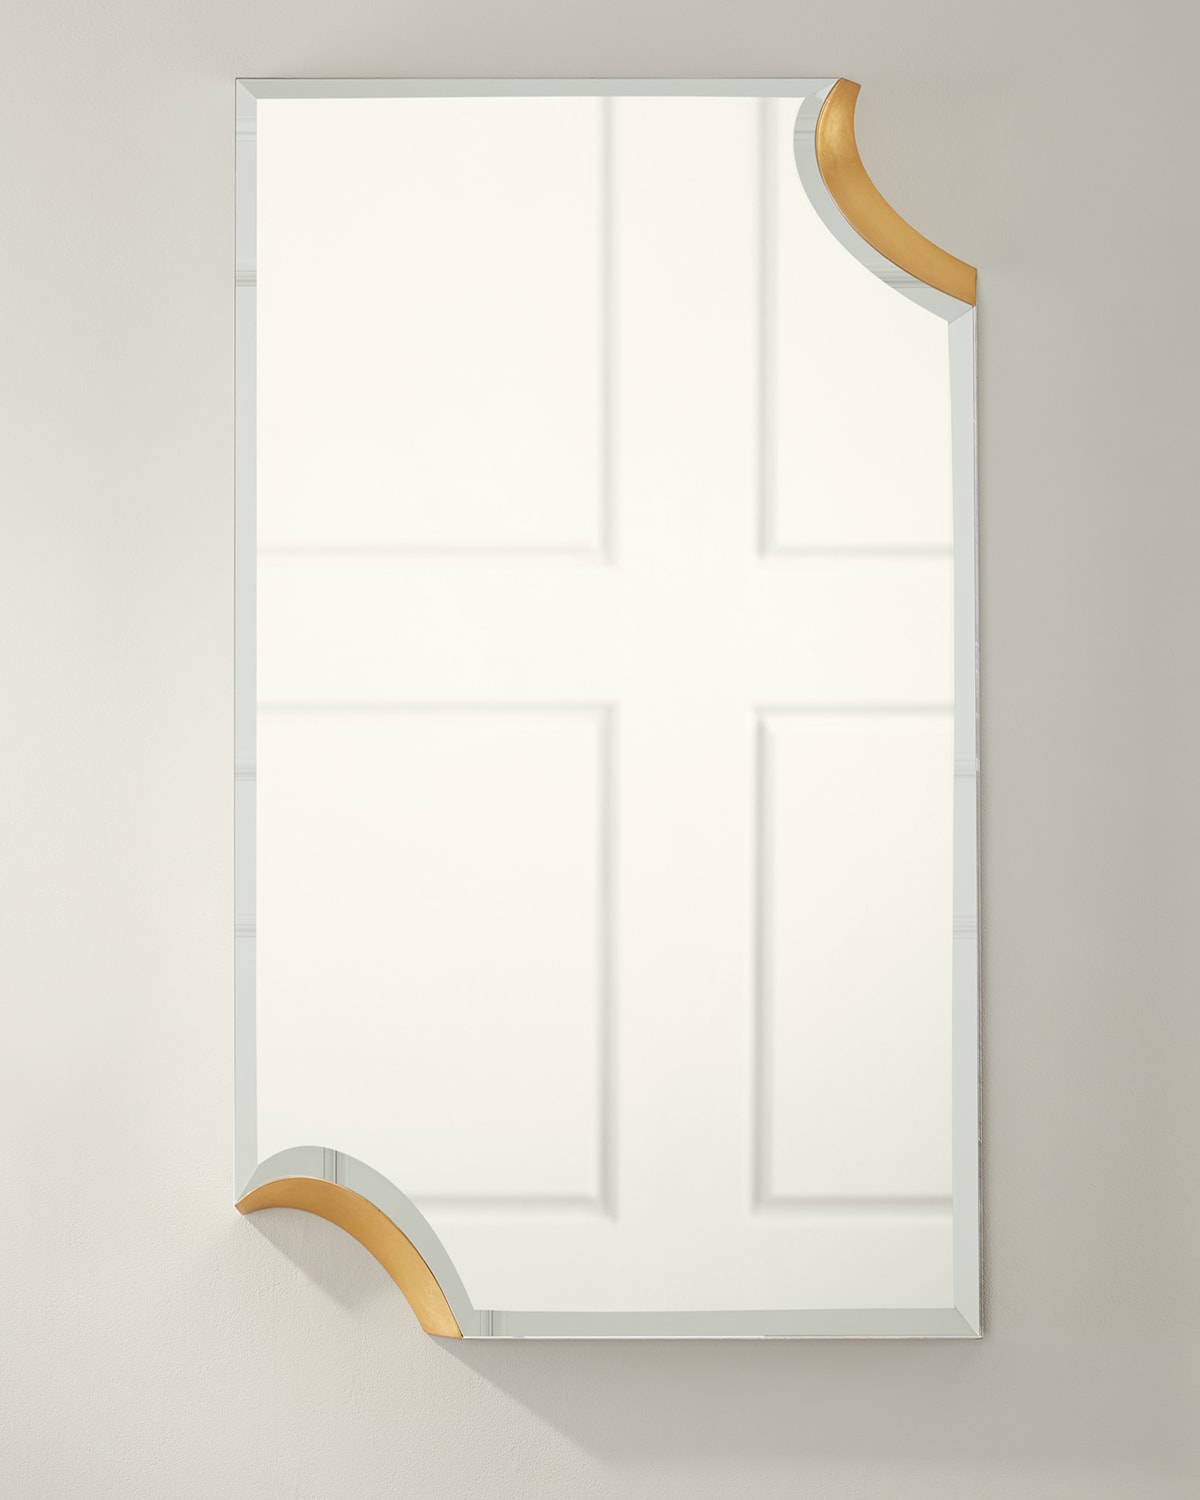 John-richard Collection Clipped Corners Mirror In White